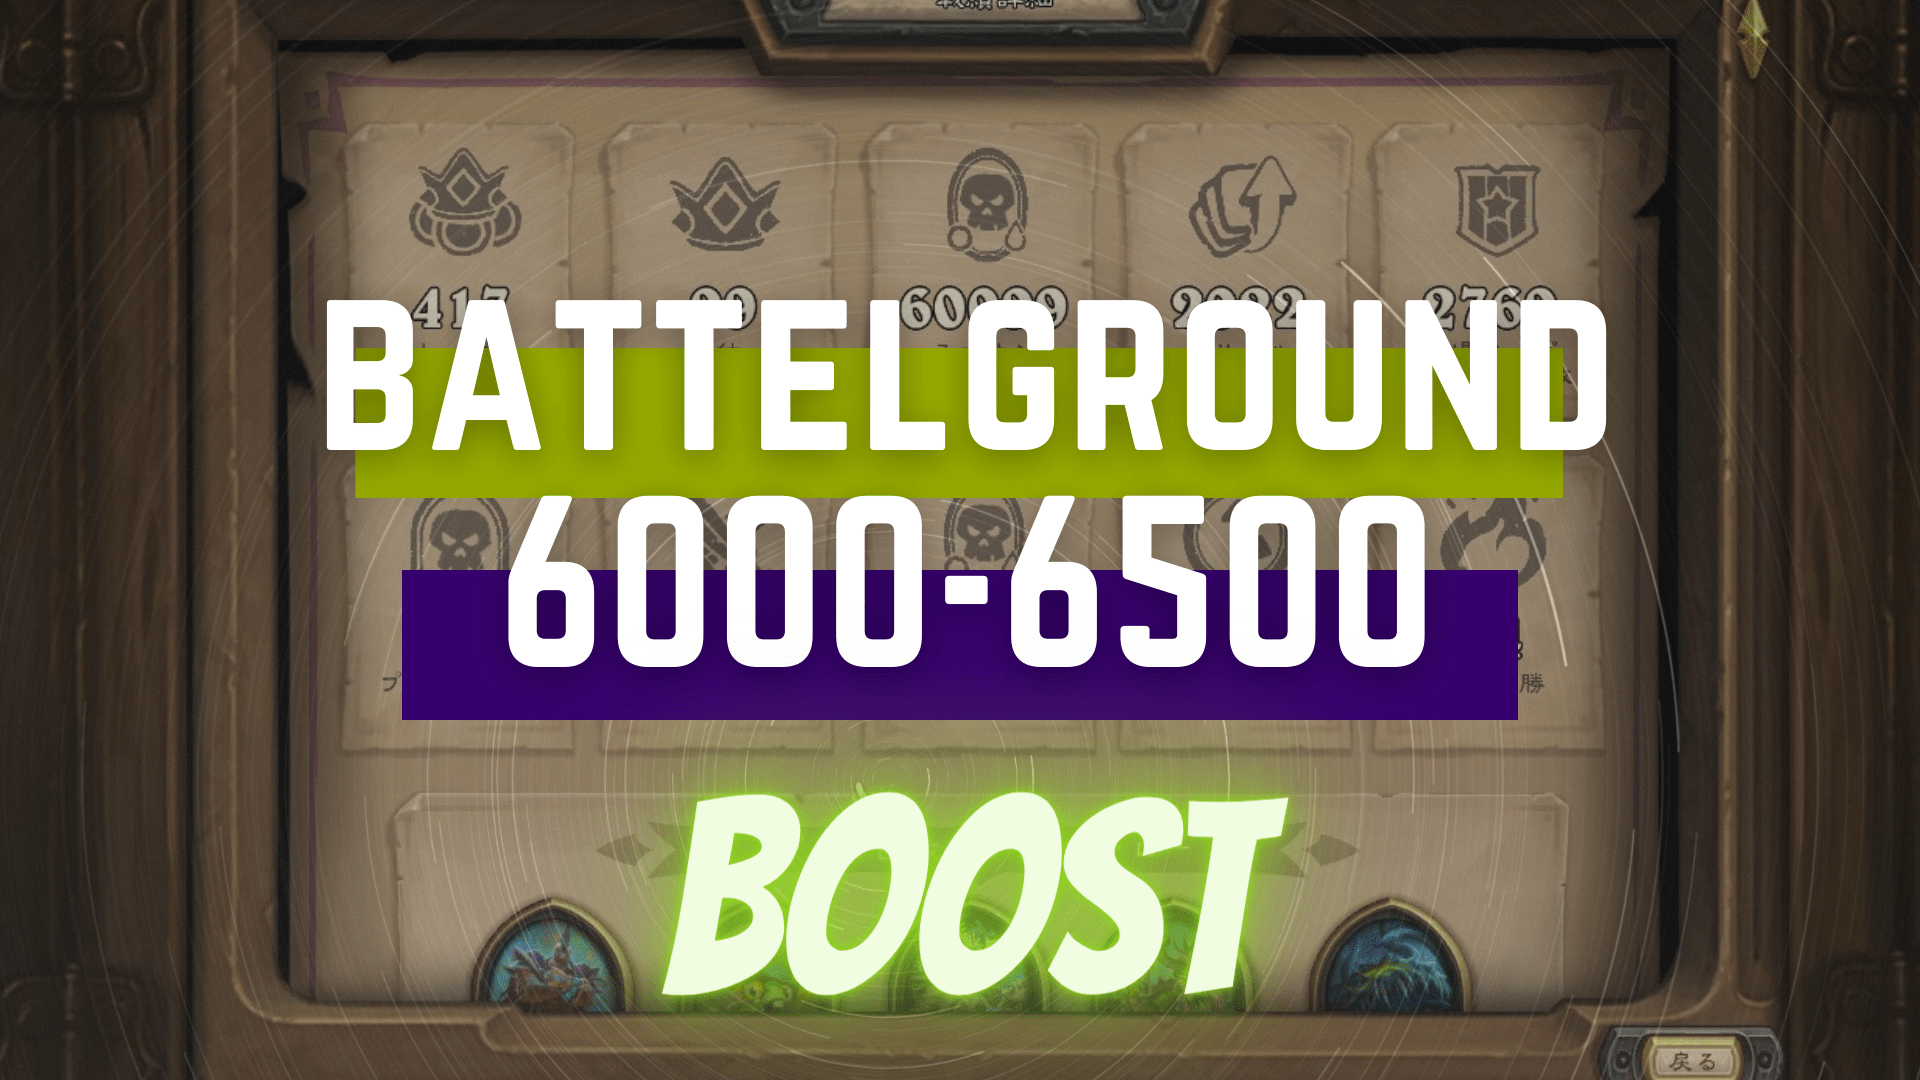 [BATTLEGROUNDS RATING] BOOST FROM 6000 TO 6500 GBD - e2p.com